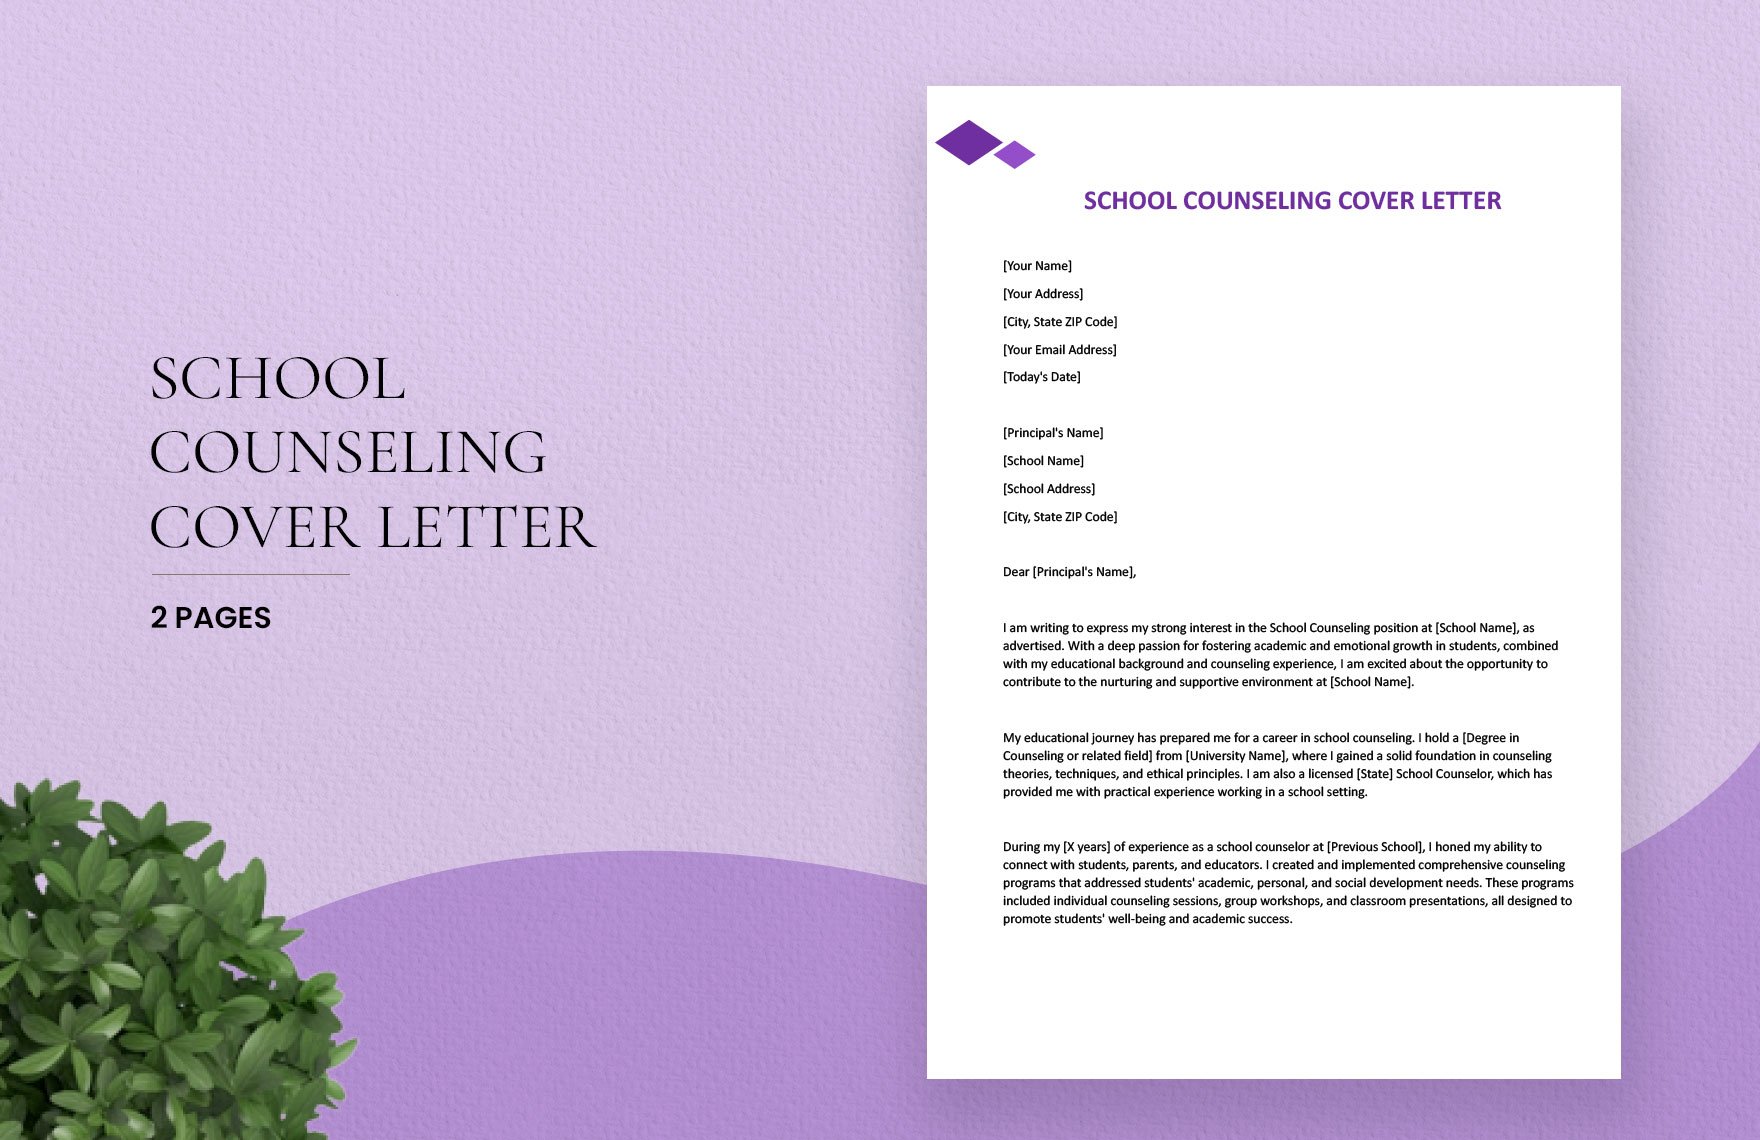 School Counseling Cover Letter in Word, Google Docs